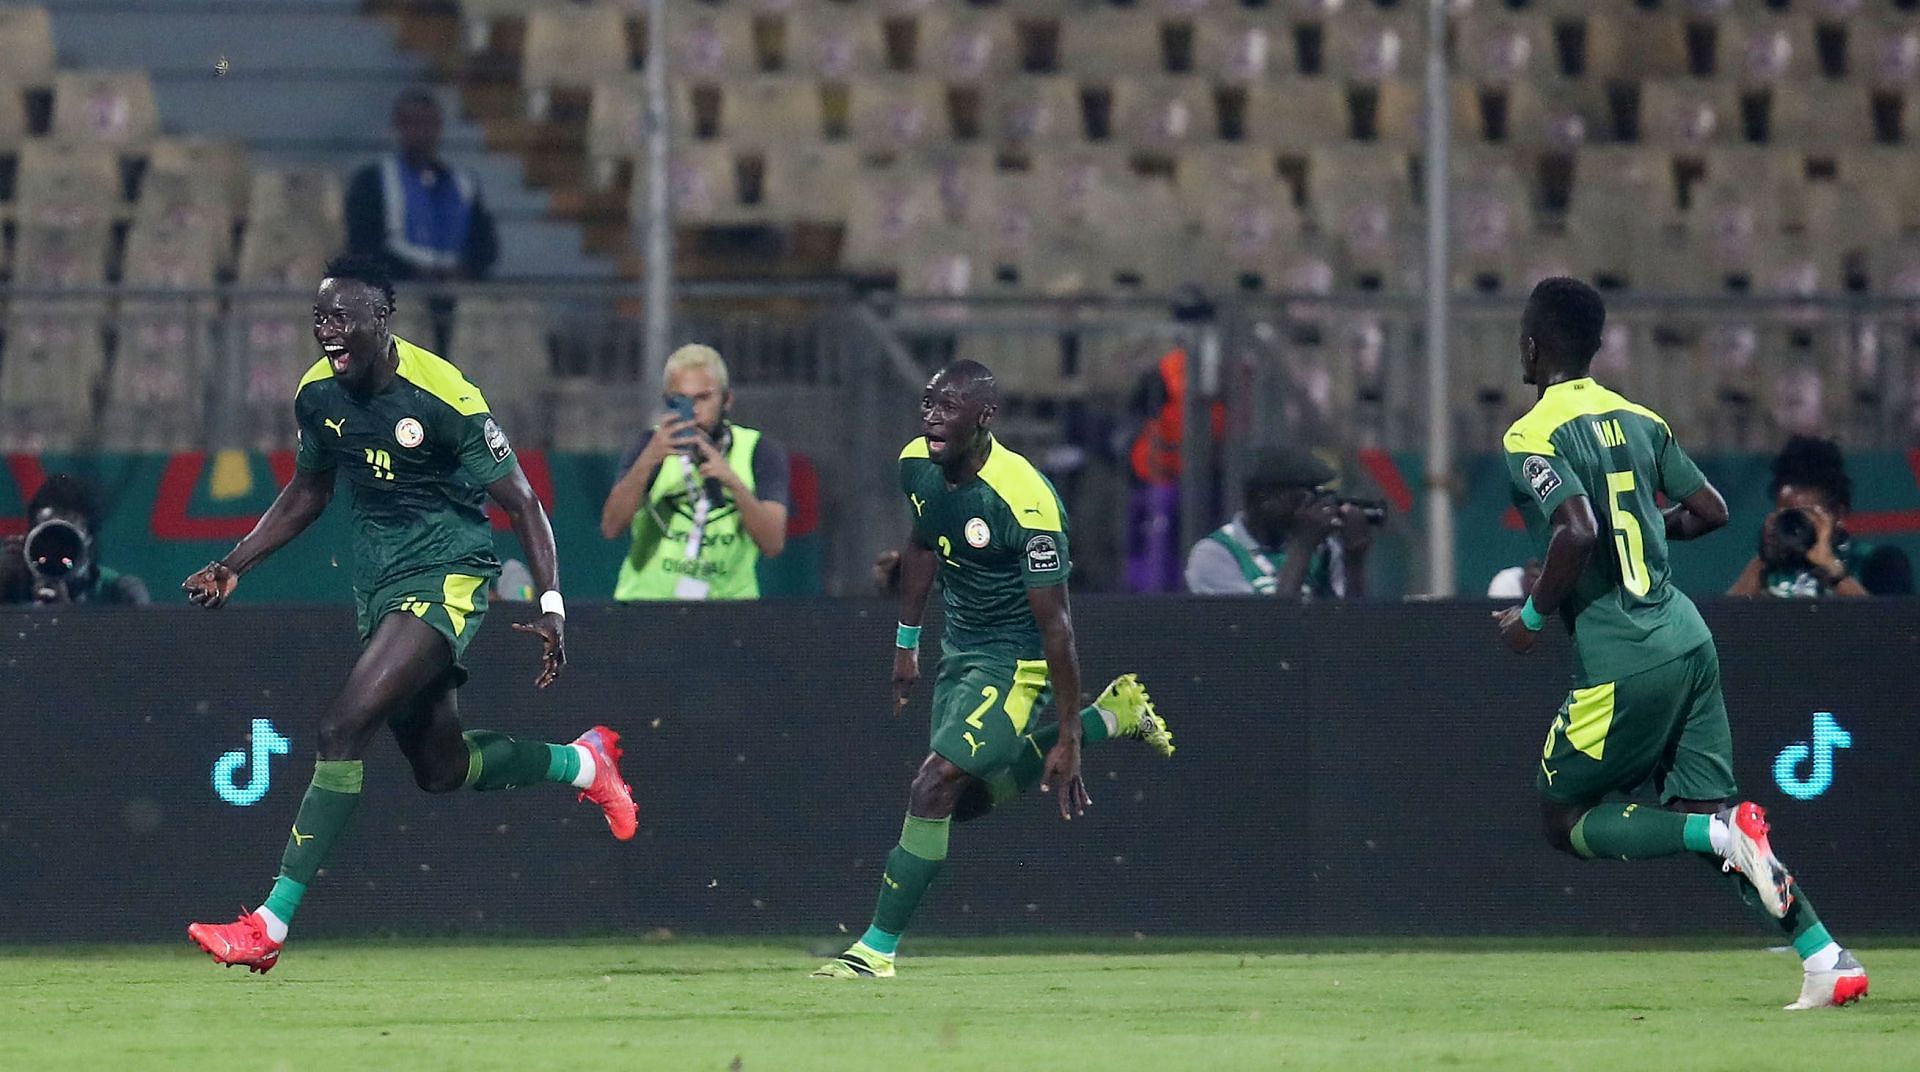 The Teranga Lions have qualified for the semifinals of AFCON 2021